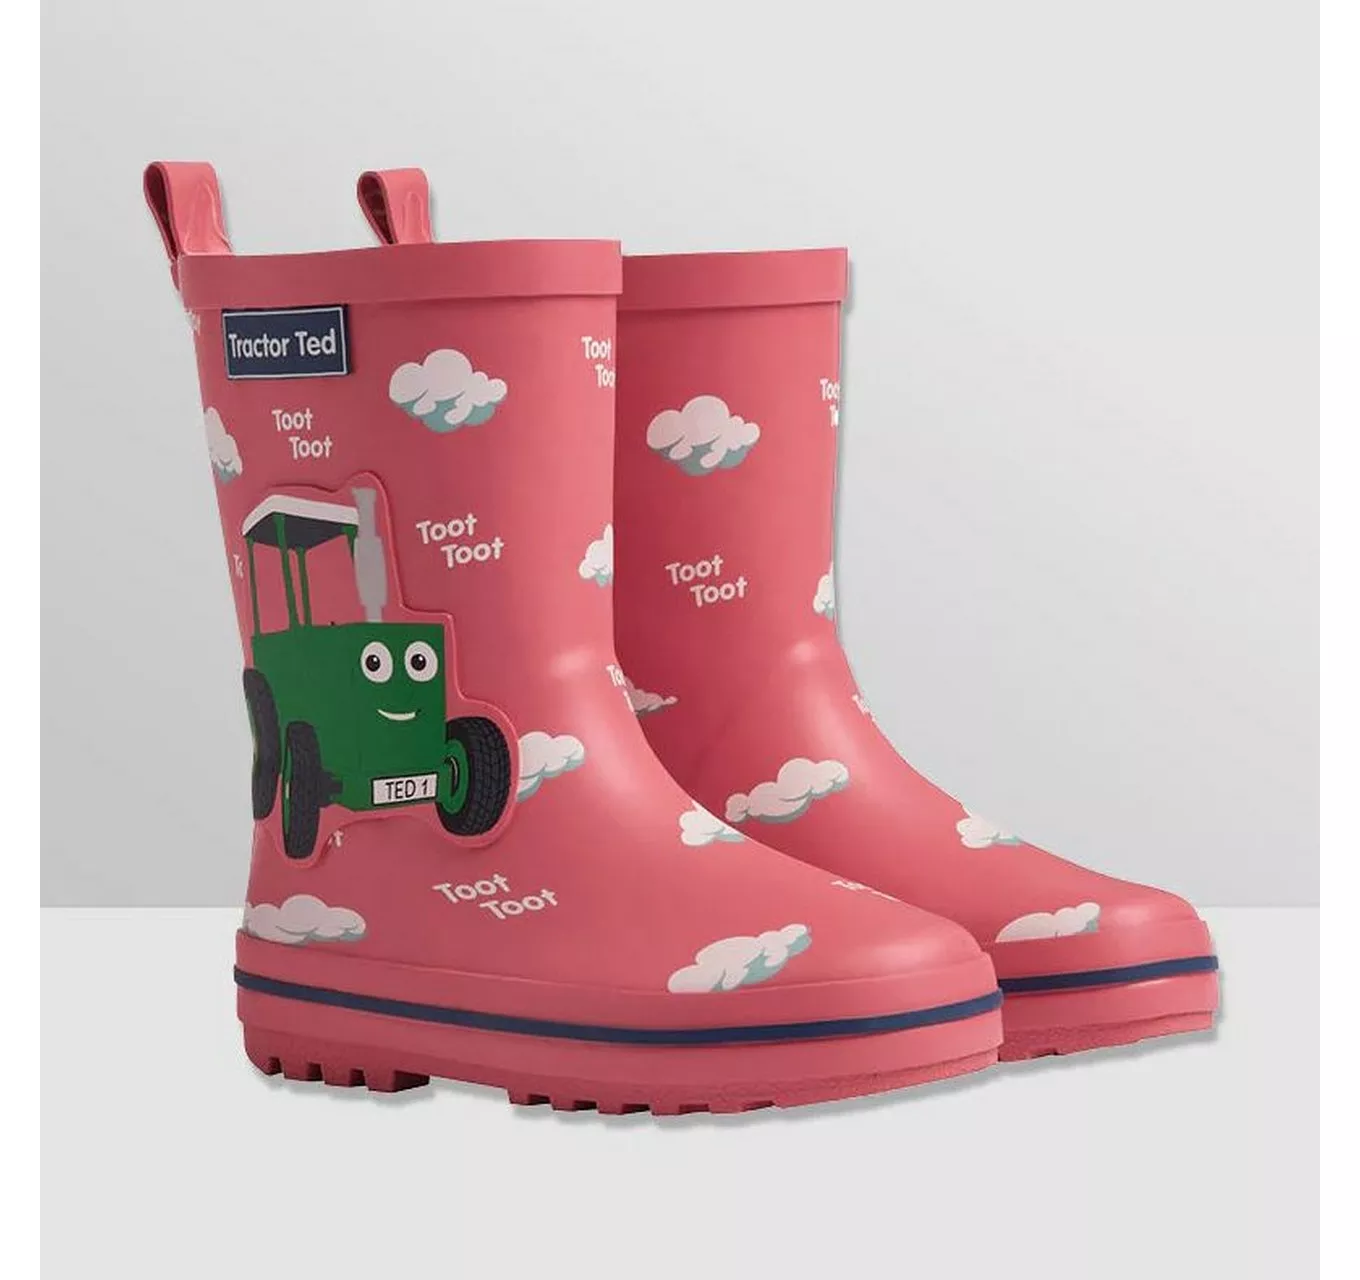 Tractor Ted Toot! Wellies 5